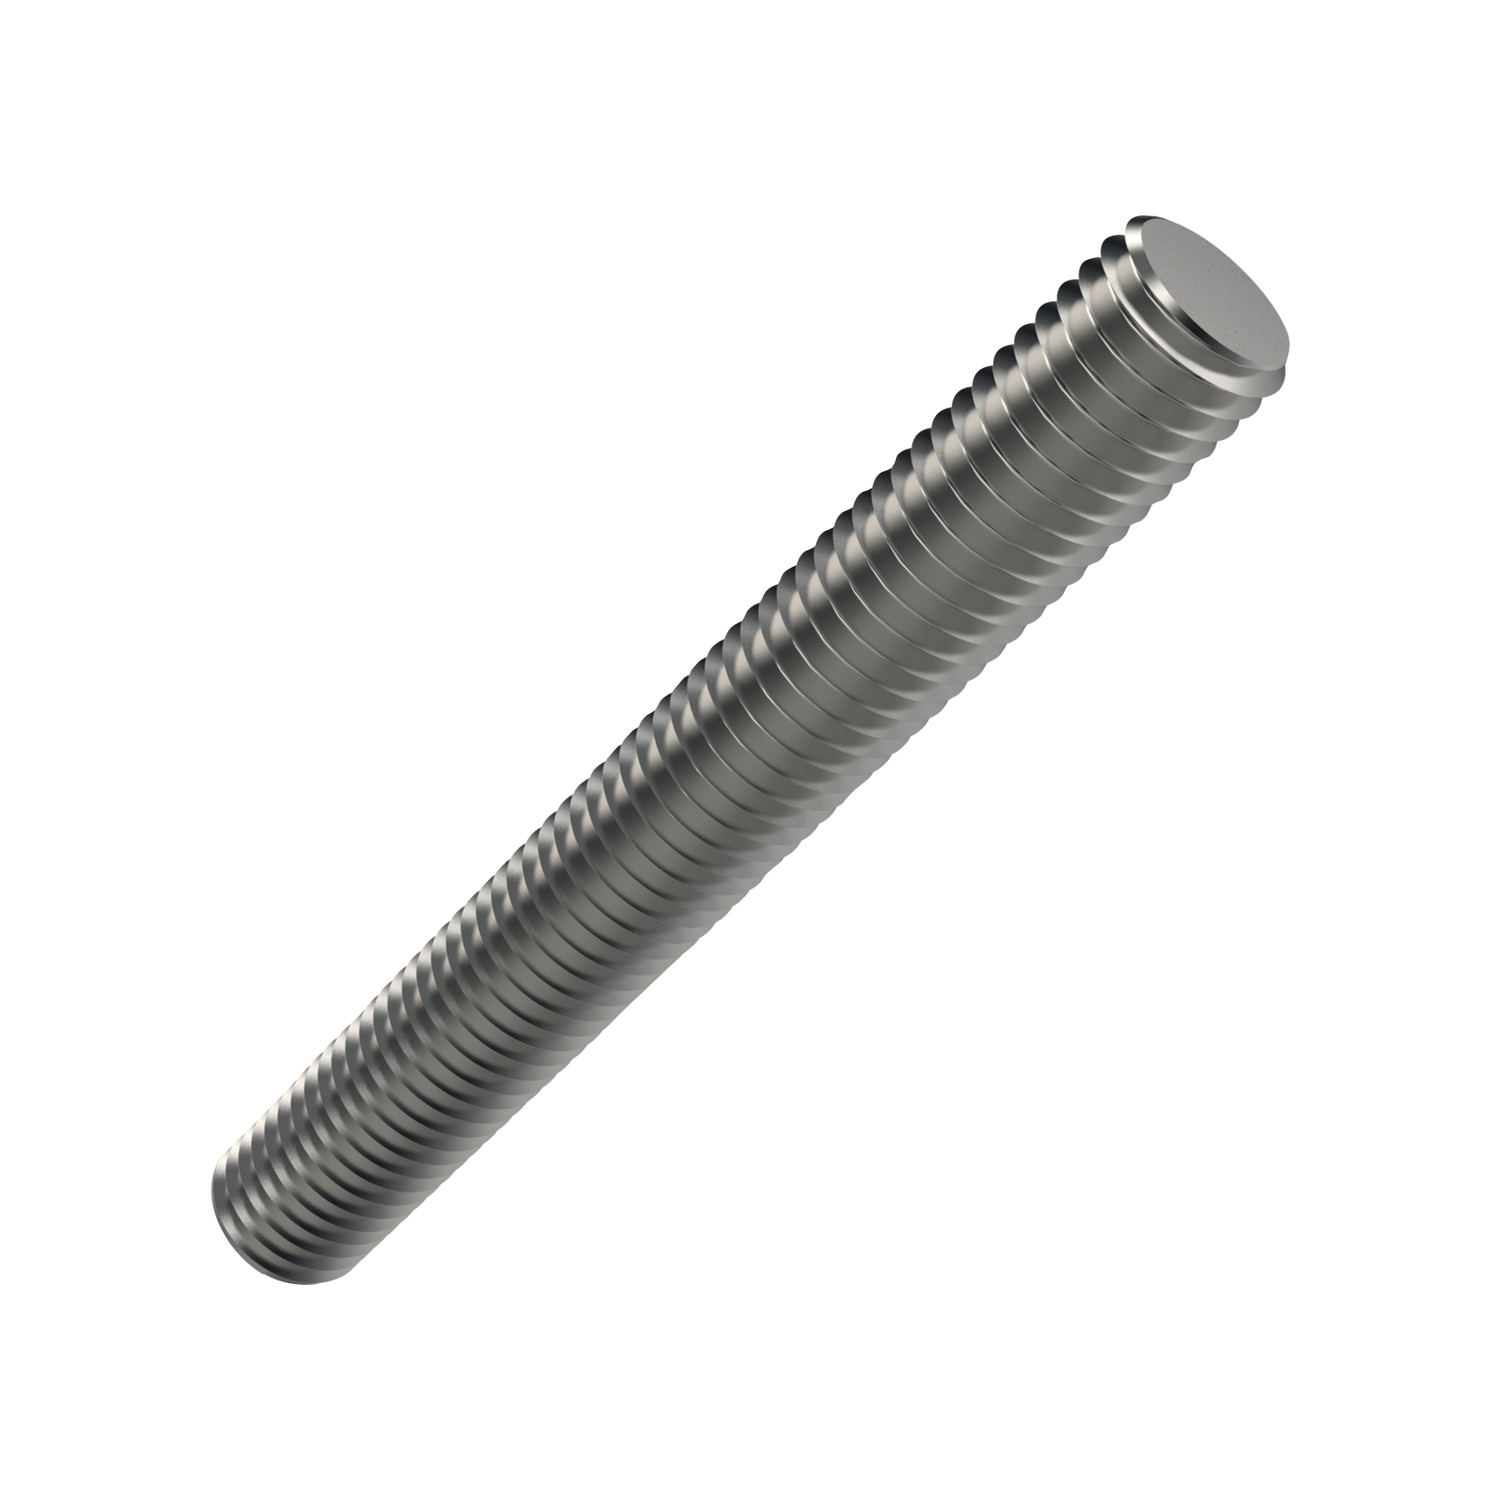 Product P0290.SS, Stainless Threaded Rod Stainless / 